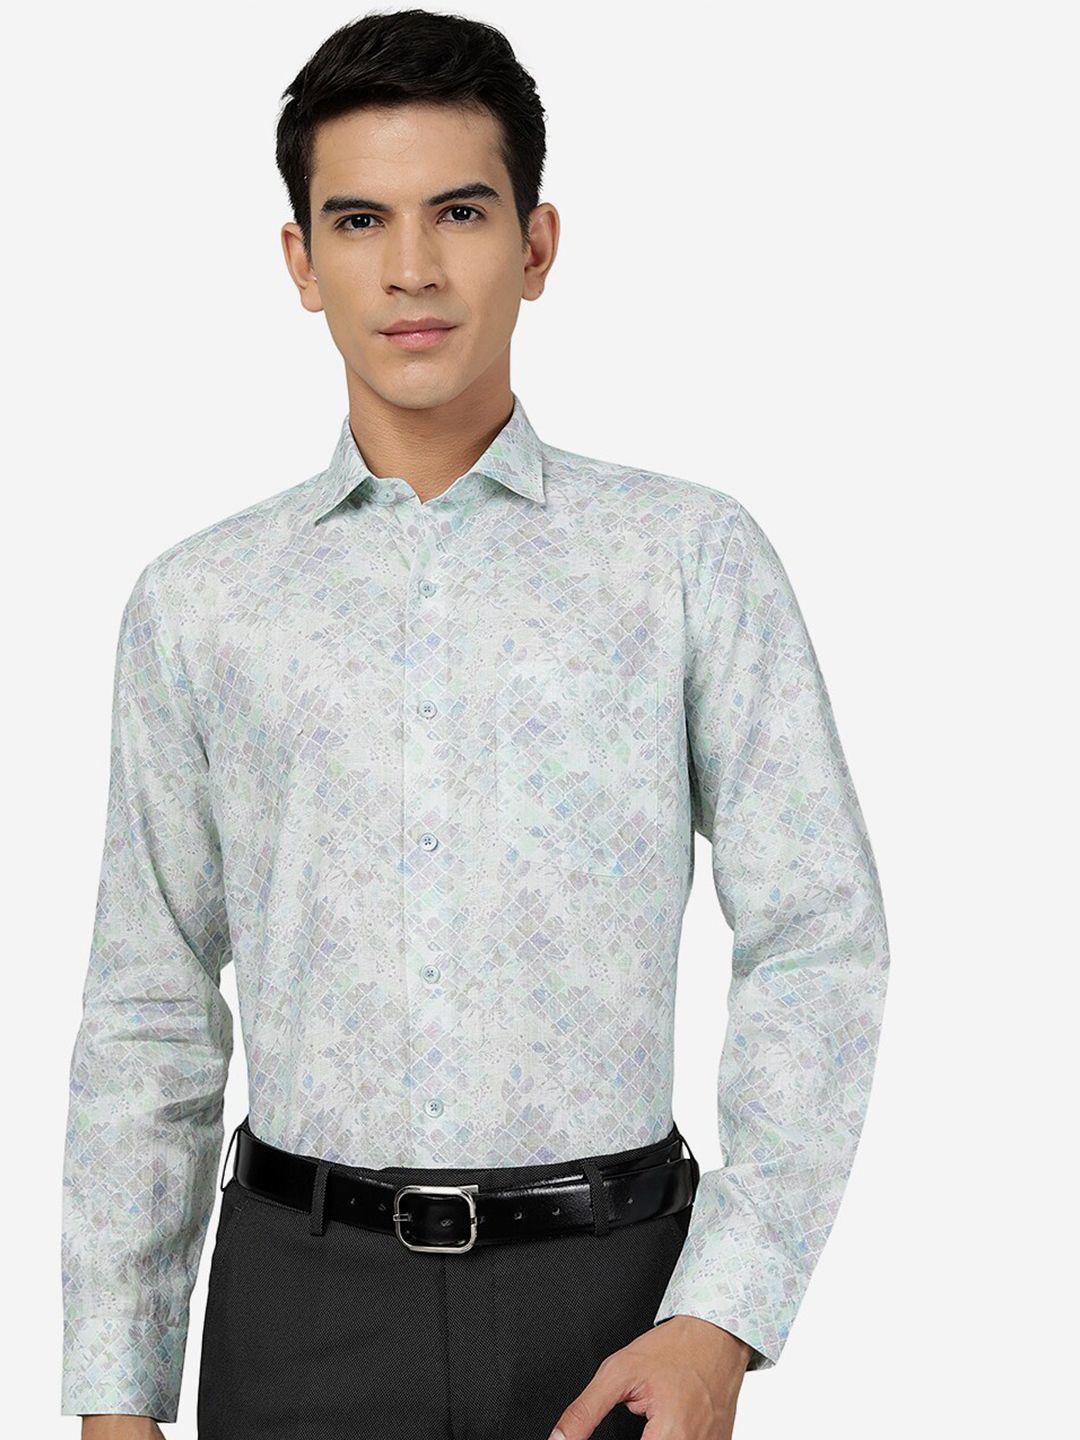 jade-blue-abstract-printed-pure-linen-pure-cotton-formal-shirt